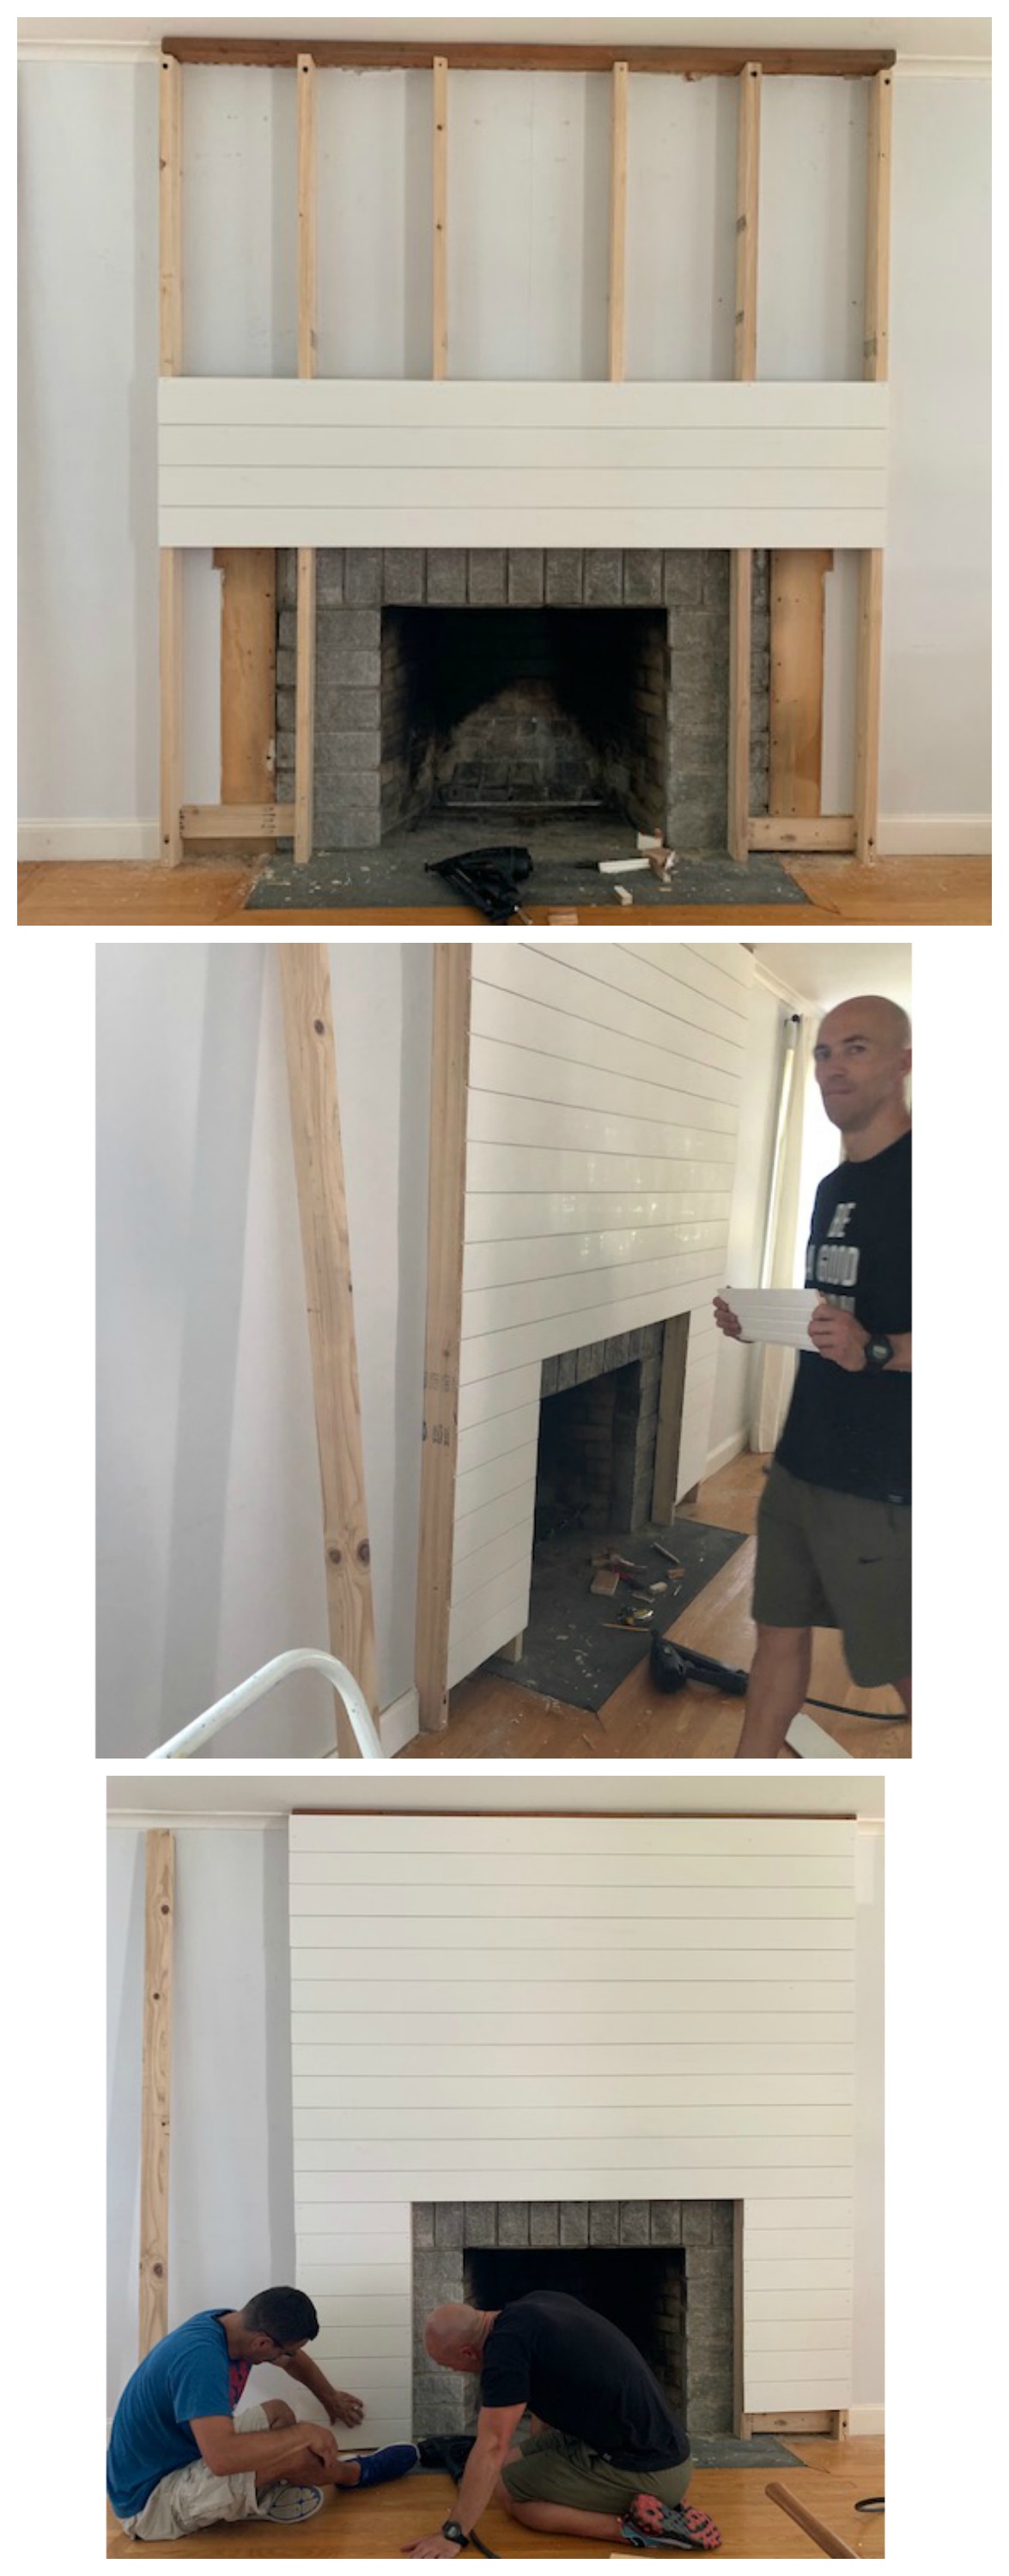 Cover Brick Fireplace with Wood Panels Fresh Shiplap Fireplace and Diy Mantle Ditched the Old